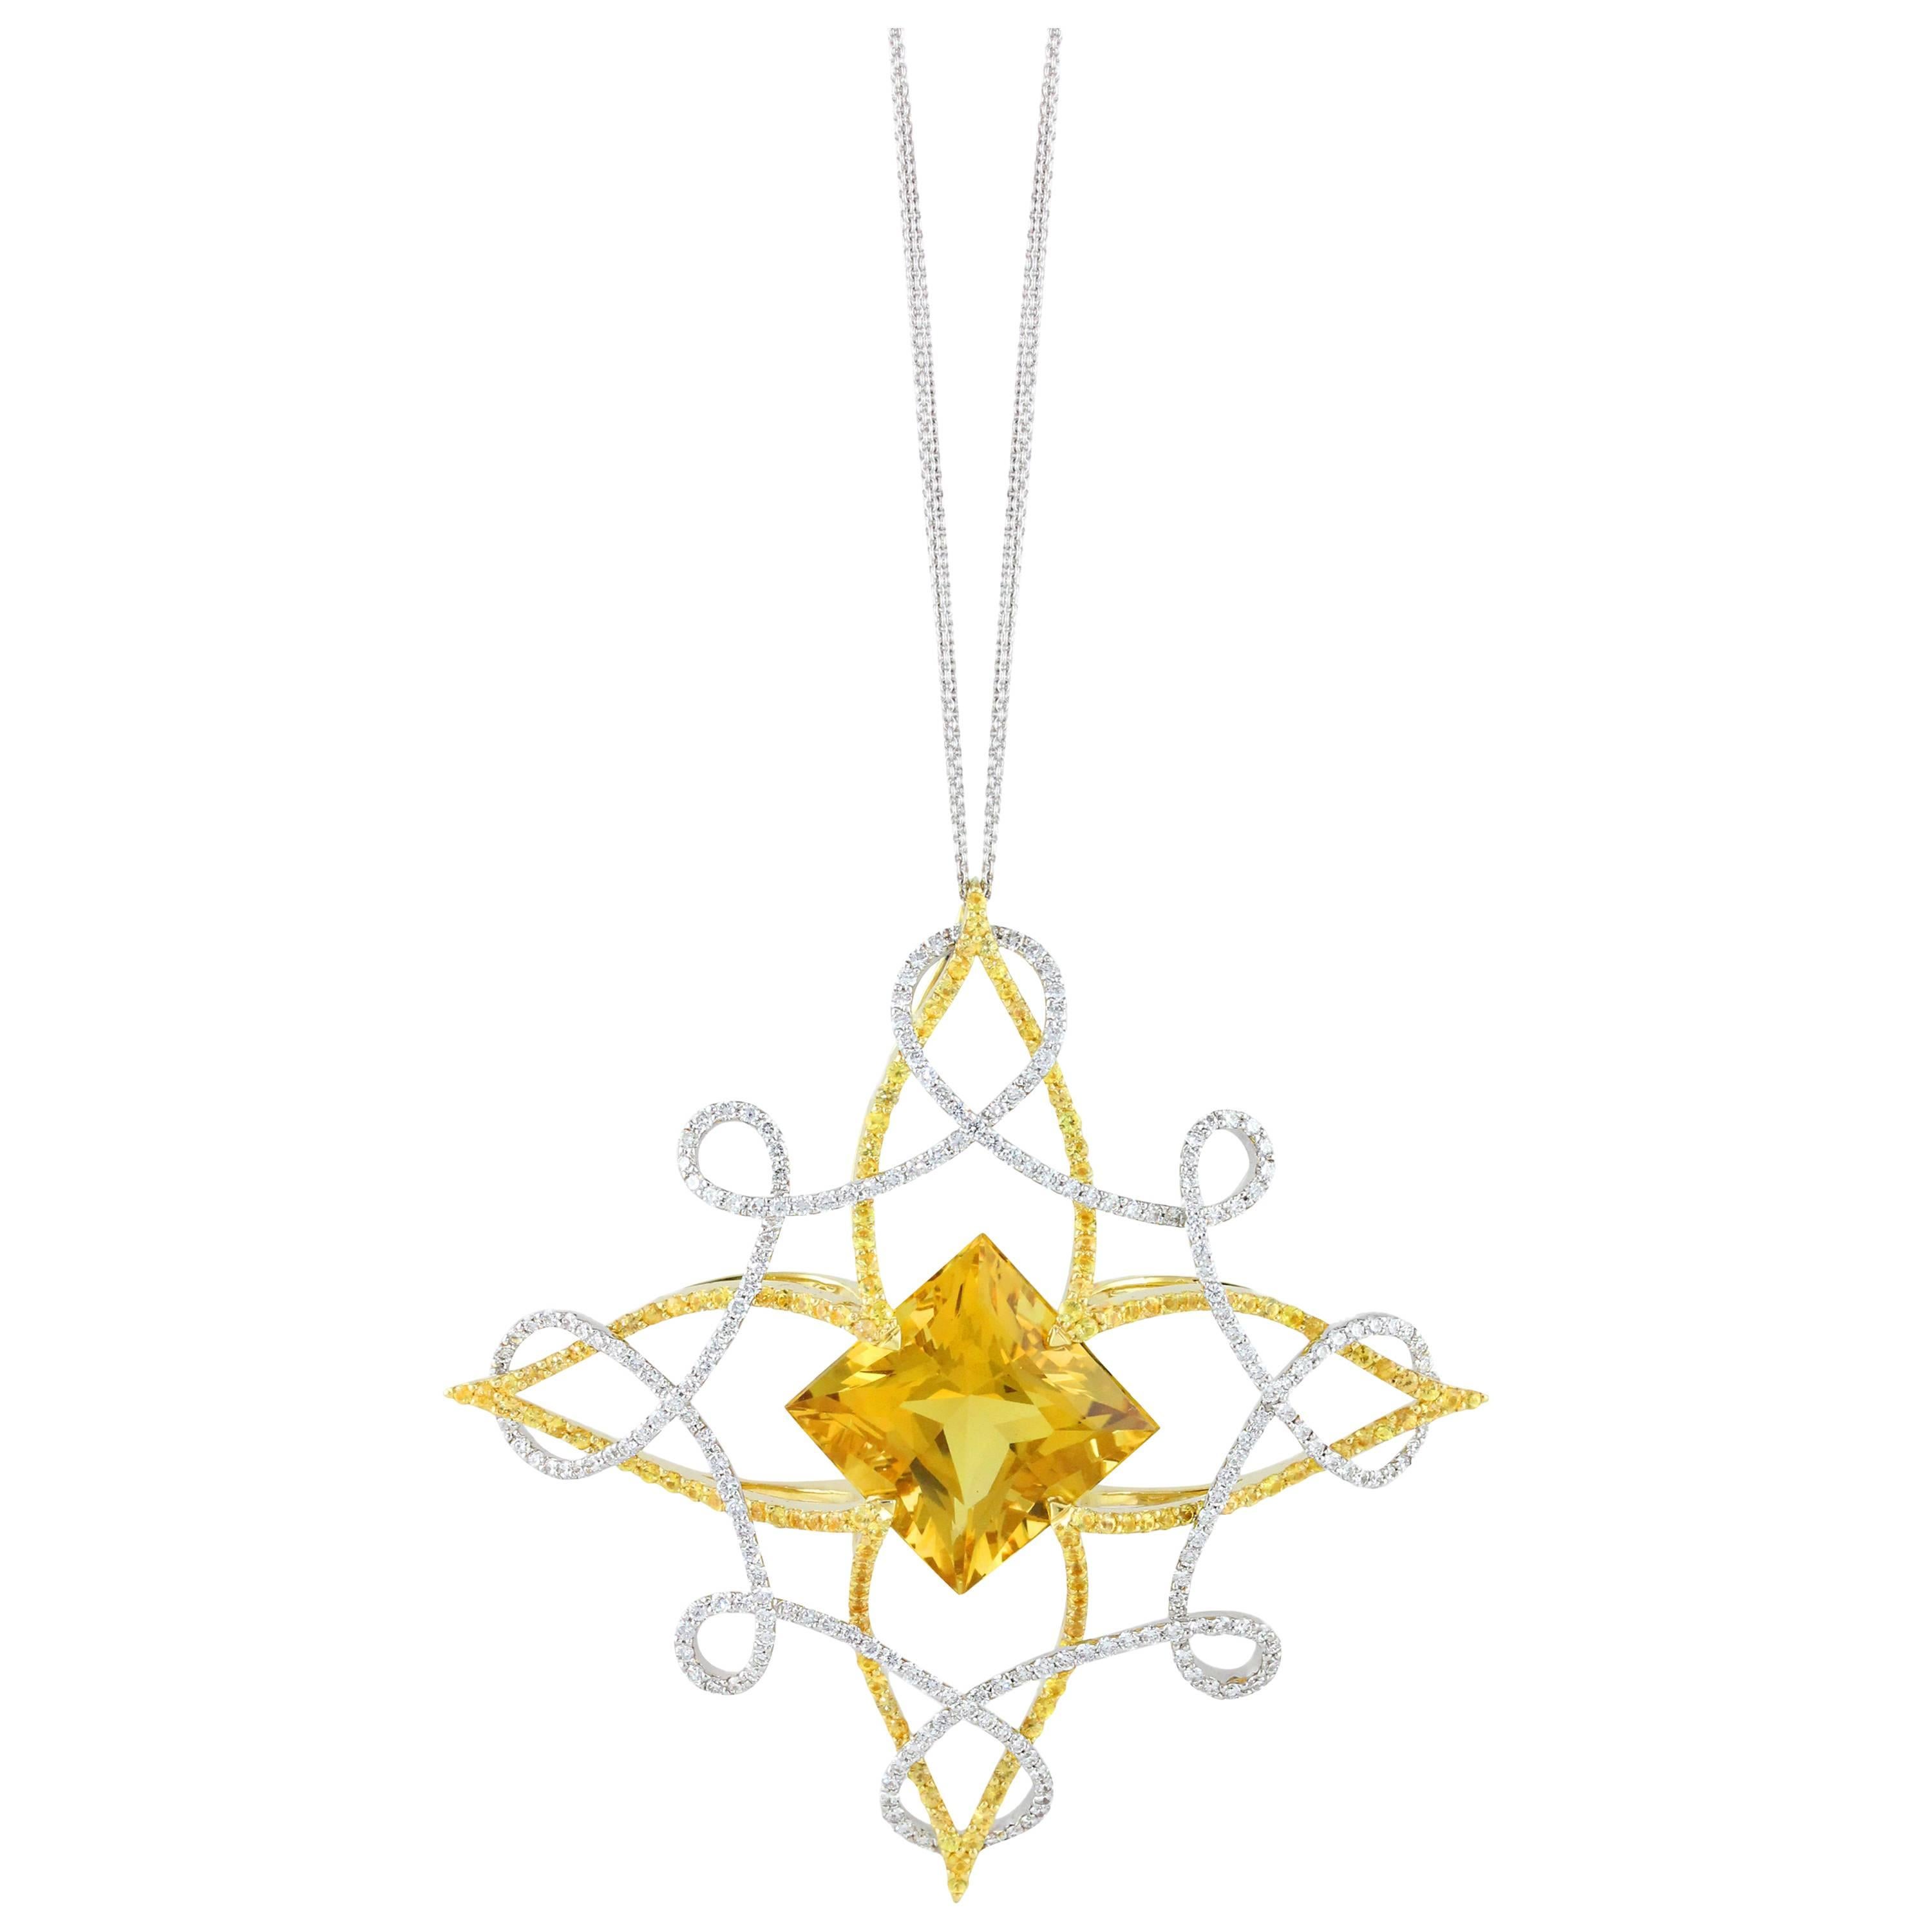 Frederic Sage 35.05 Carat Unheated Yellow Beryl Pendant Necklace For Sale